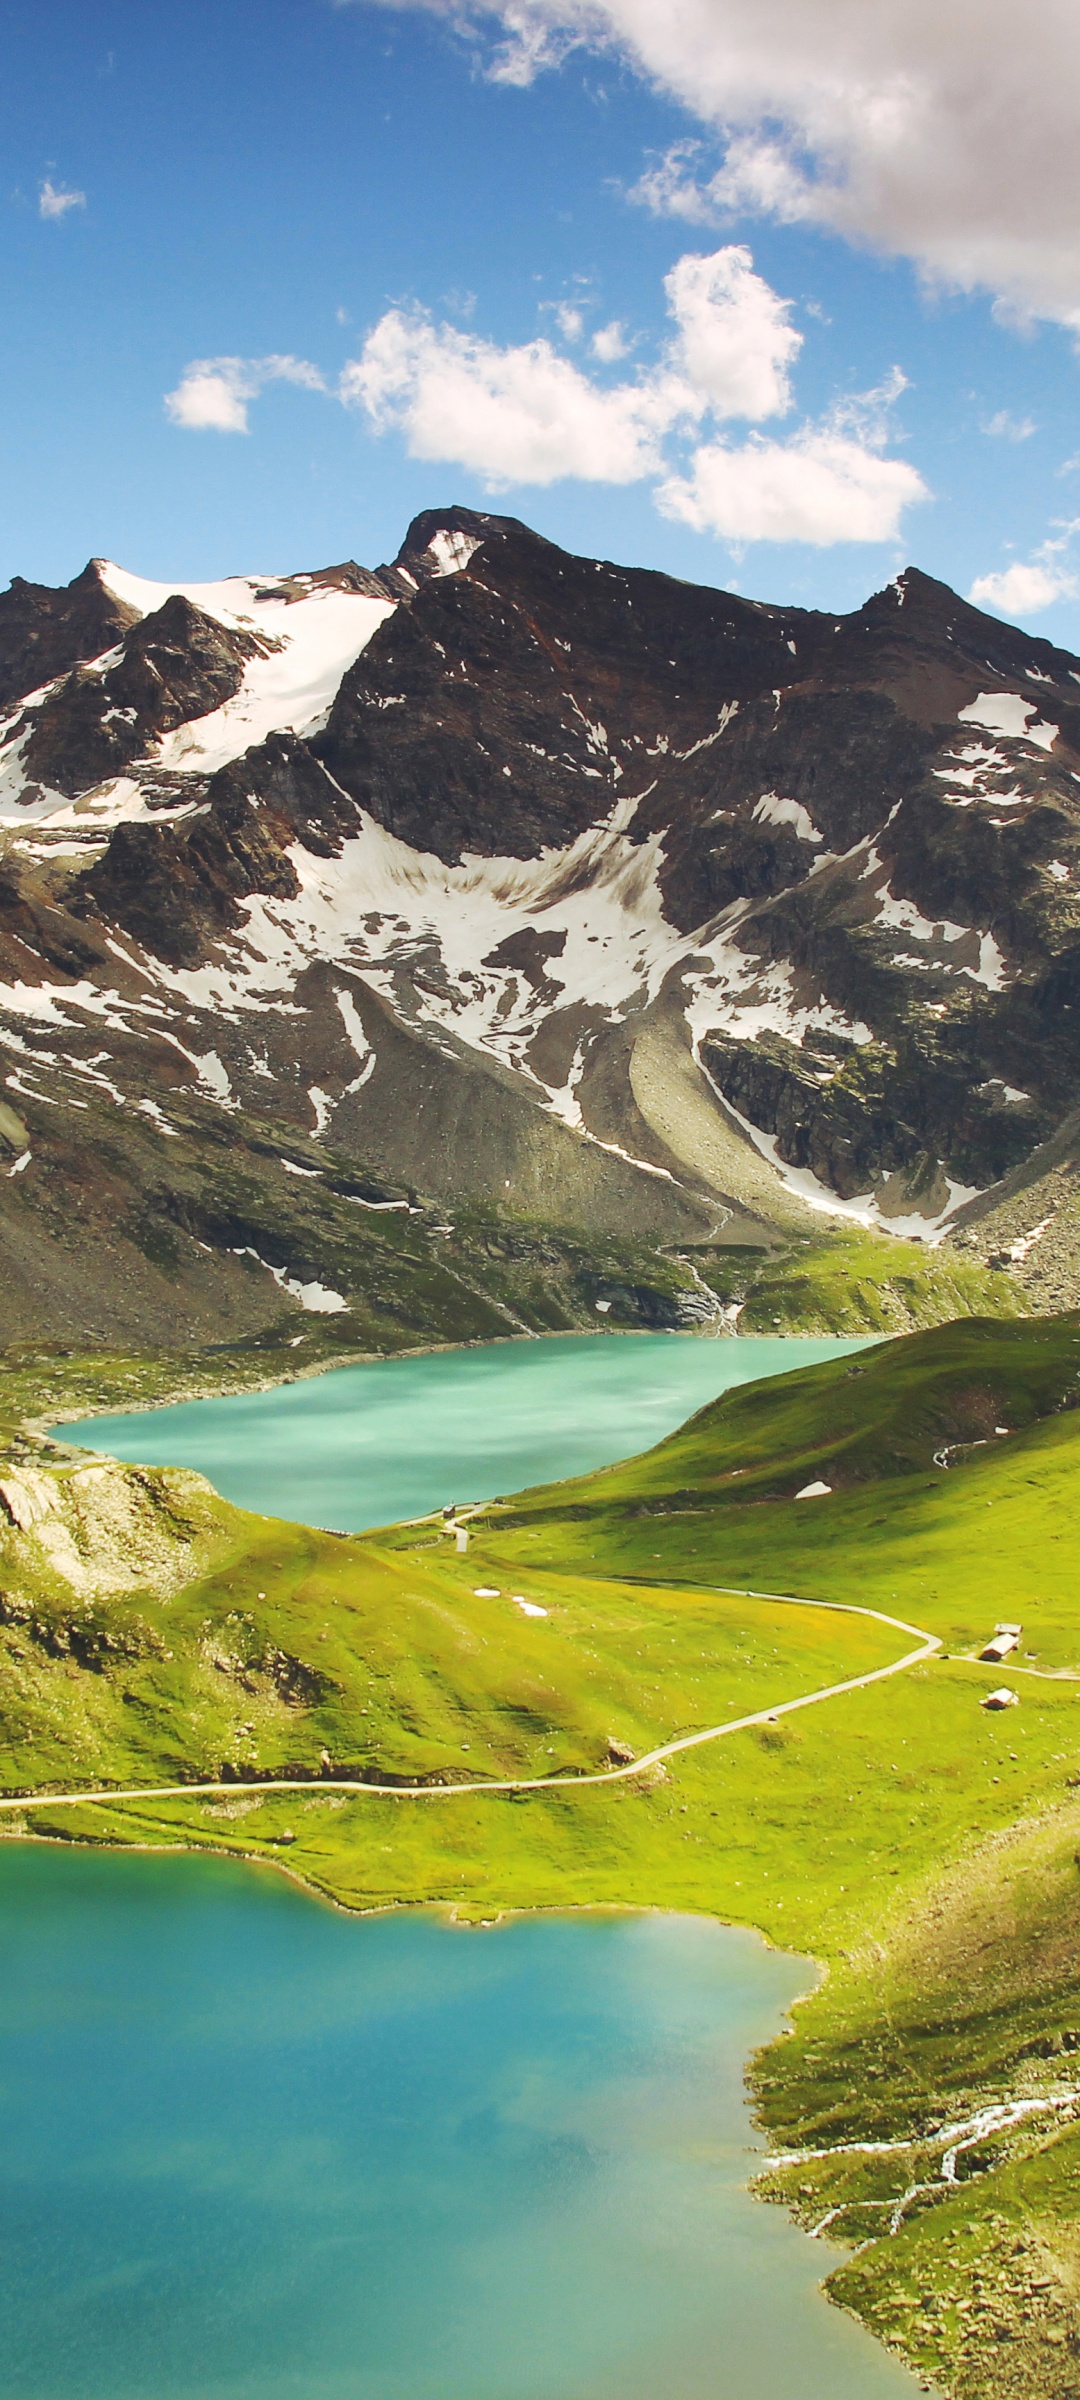 Ceresole Reale Wallpaper 4K, Summer, Mountains, Lake, Sunny day, Landscape, Nature